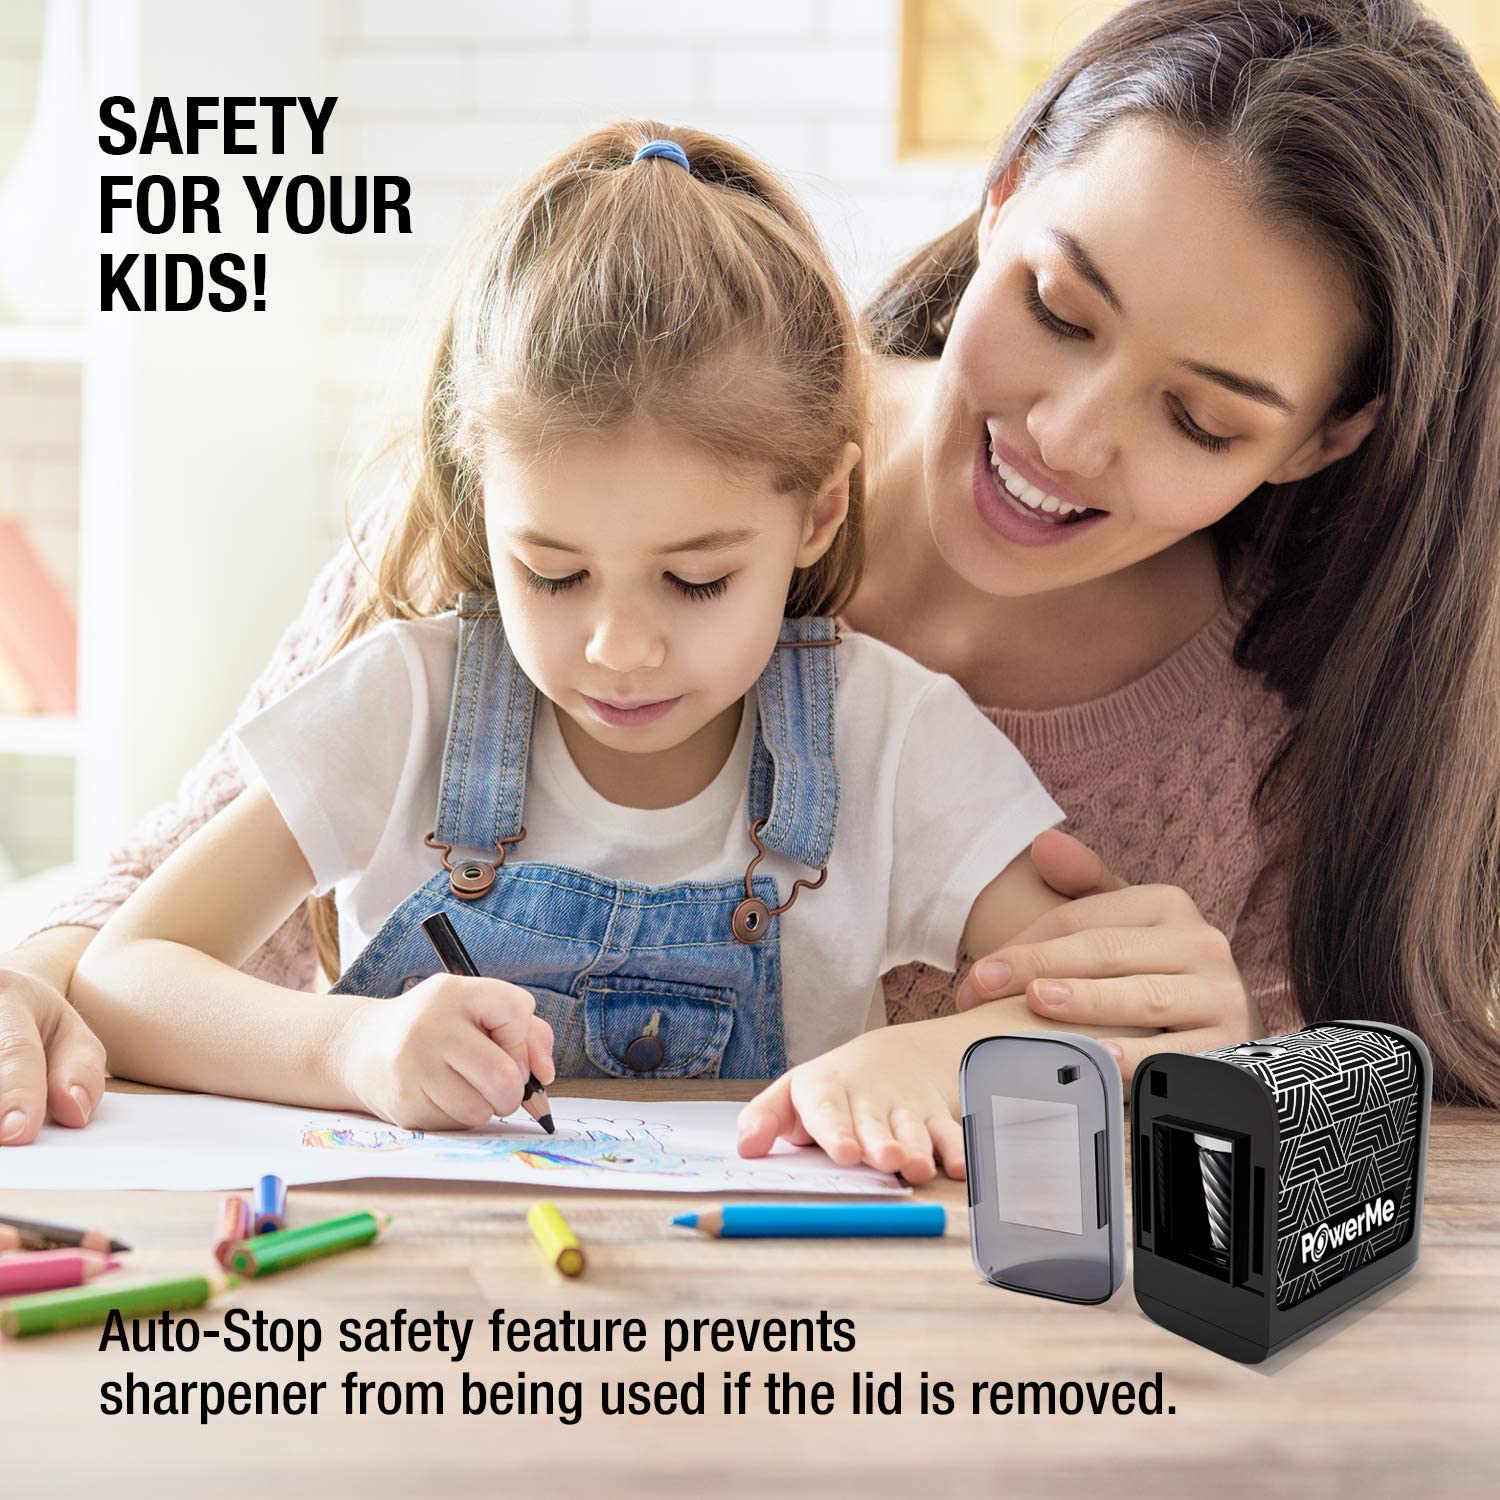 a person and a child drawing with text: 'SAFETY FOR YOUR KIDS! POwerMe Auto-Stop safety feature prevents sharpener from being used if the lid is removed.'